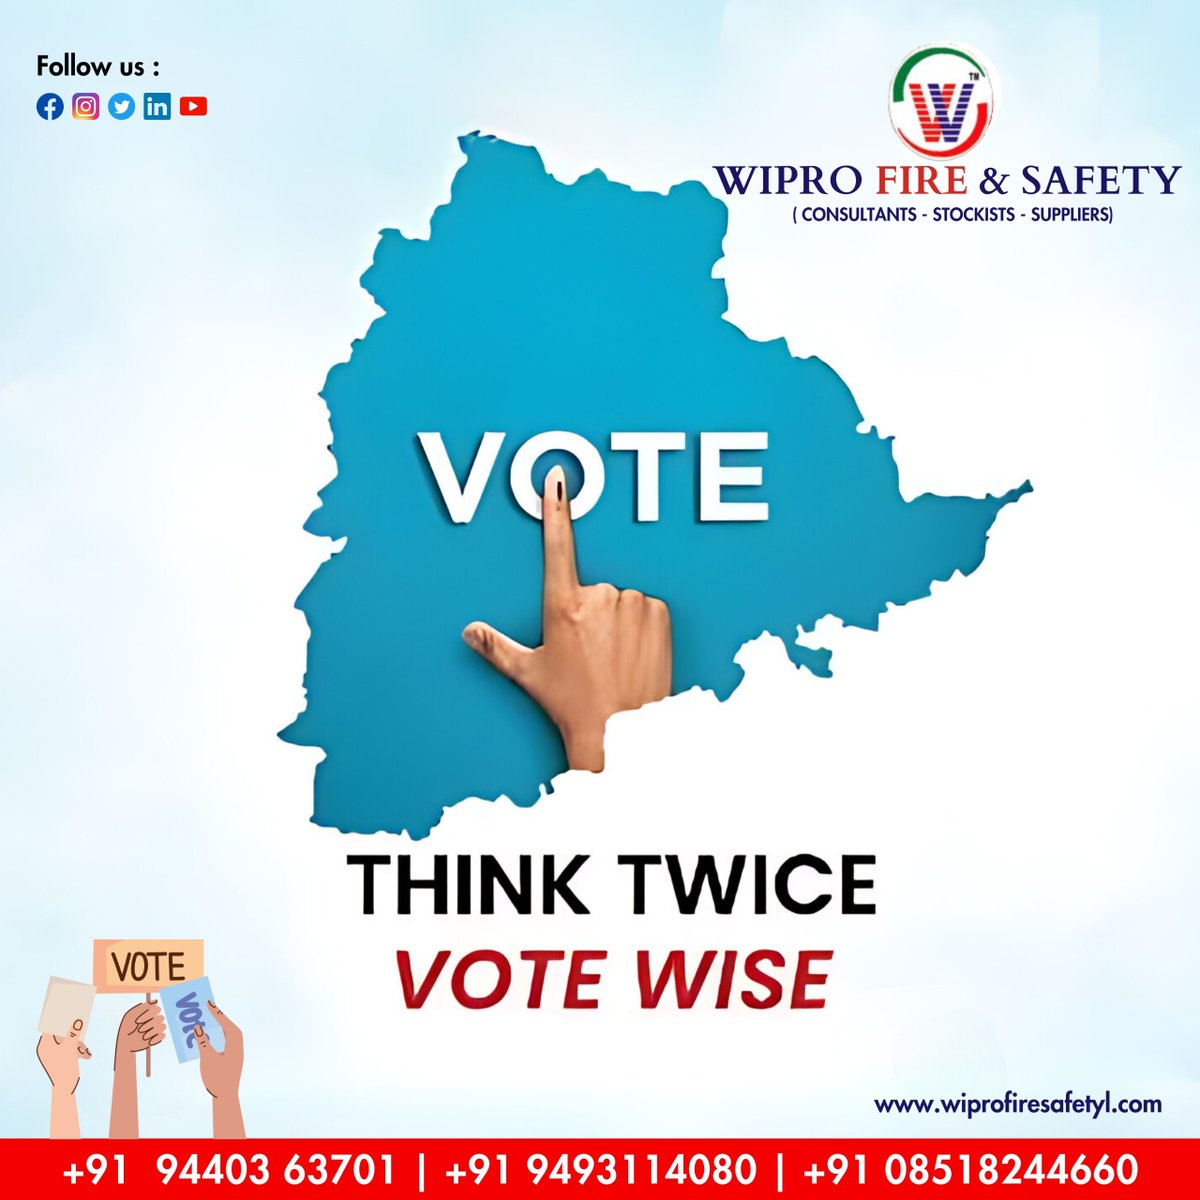 🗳️ VOTE 🗳️

THINK TWICE, VOTE WISE.

Visit us at wiprofiresafetyl.com for more information. Contact us at +91 9440363701, +91 9493114080, or +9108518244660.

#VotingMatters #VoteWisely #WiproFireSafety #YourVoteYourVoice